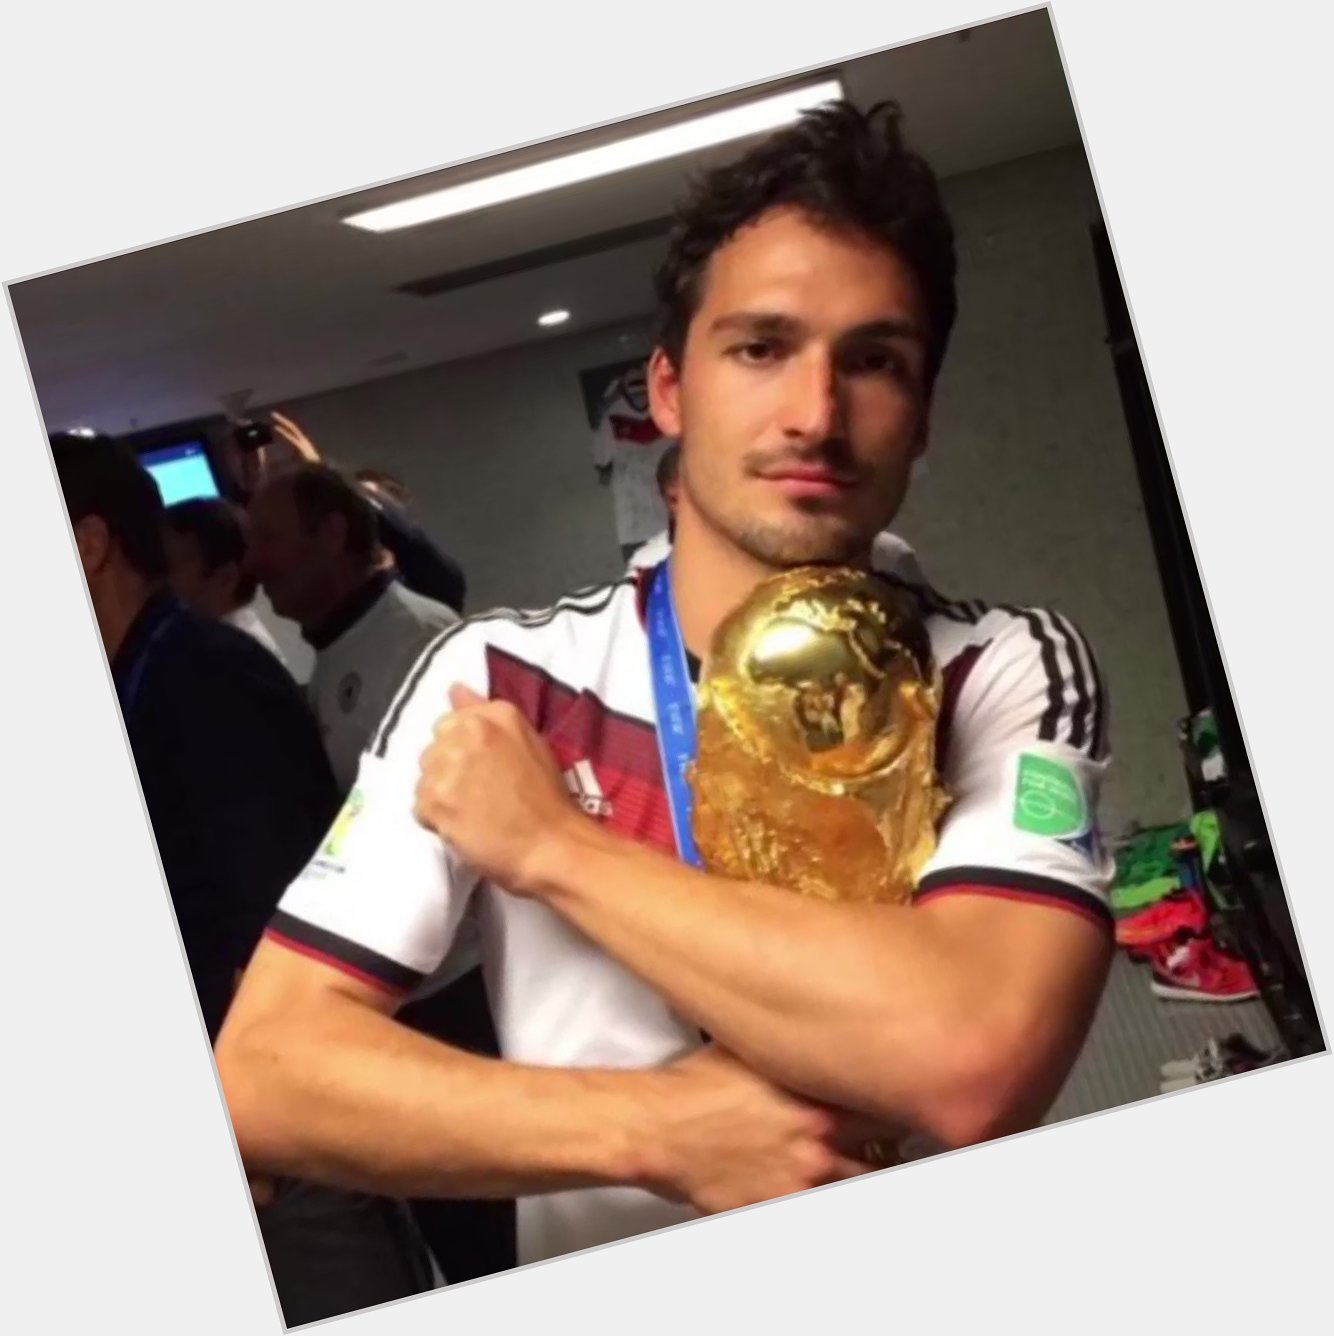 Happy birthday mats hummels you will always be famous  